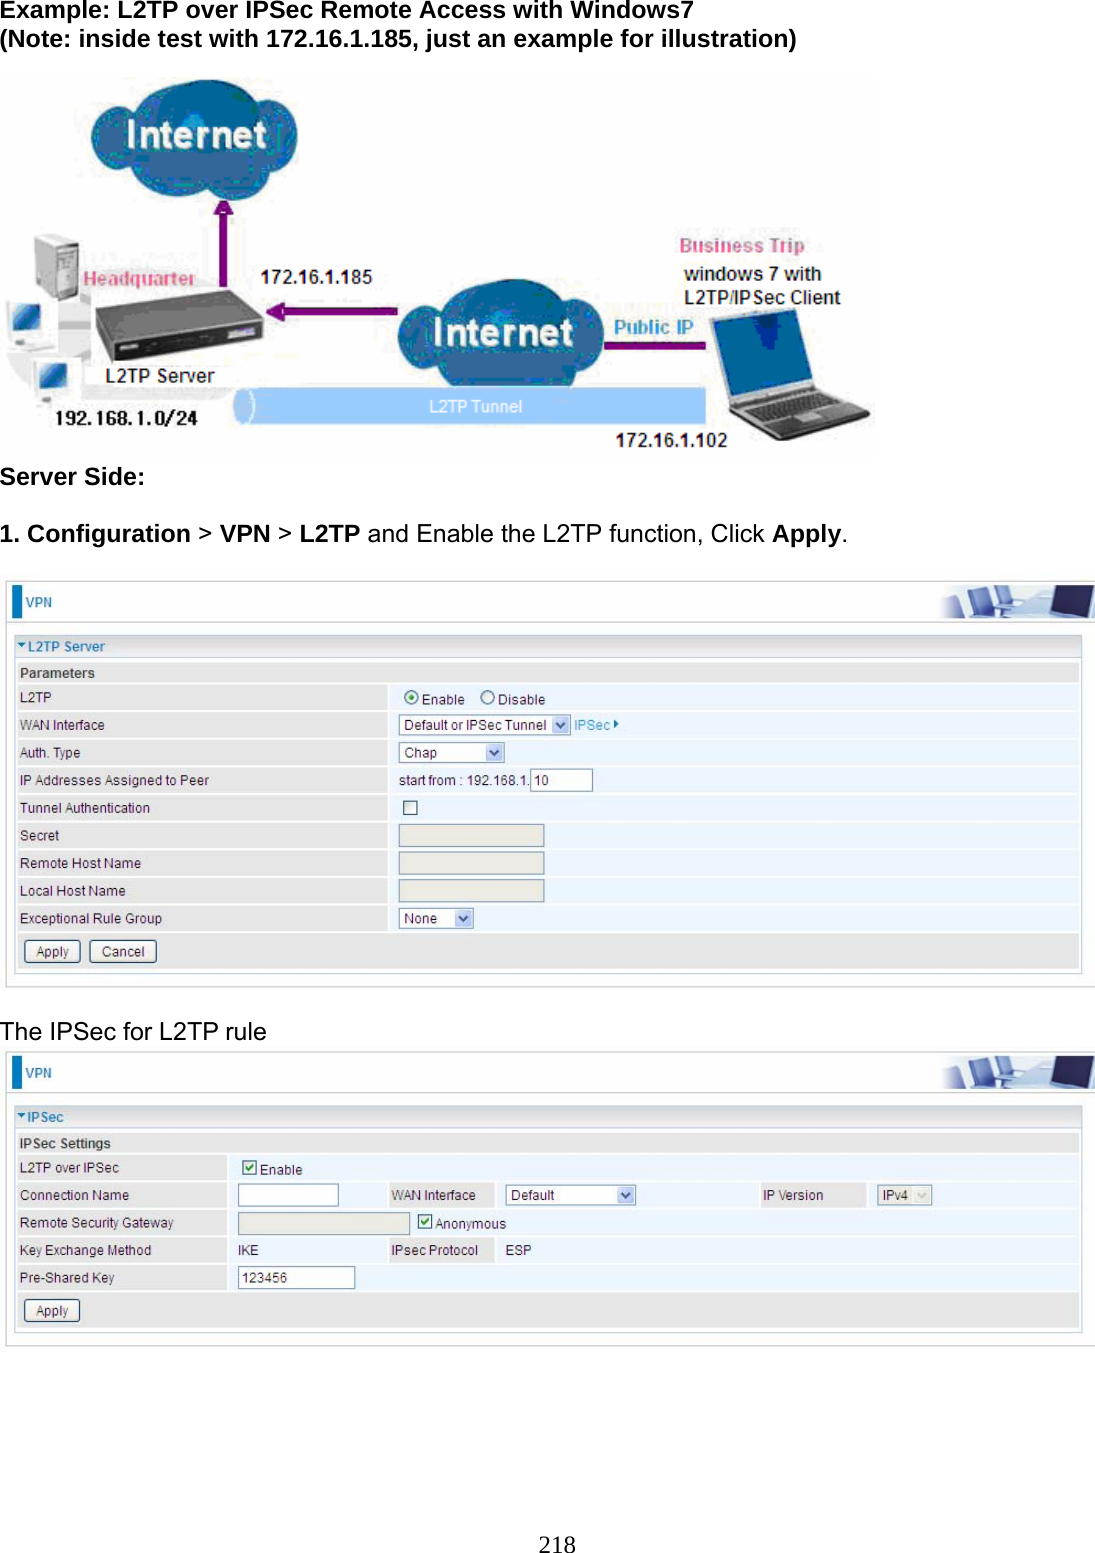 218 Example: L2TP over IPSec Remote Access with Windows7  (Note: inside test with 172.16.1.185, just an example for illustration)   Server Side:  1. Configuration &gt; VPN &gt; L2TP and Enable the L2TP function, Click Apply.    The IPSec for L2TP rule     